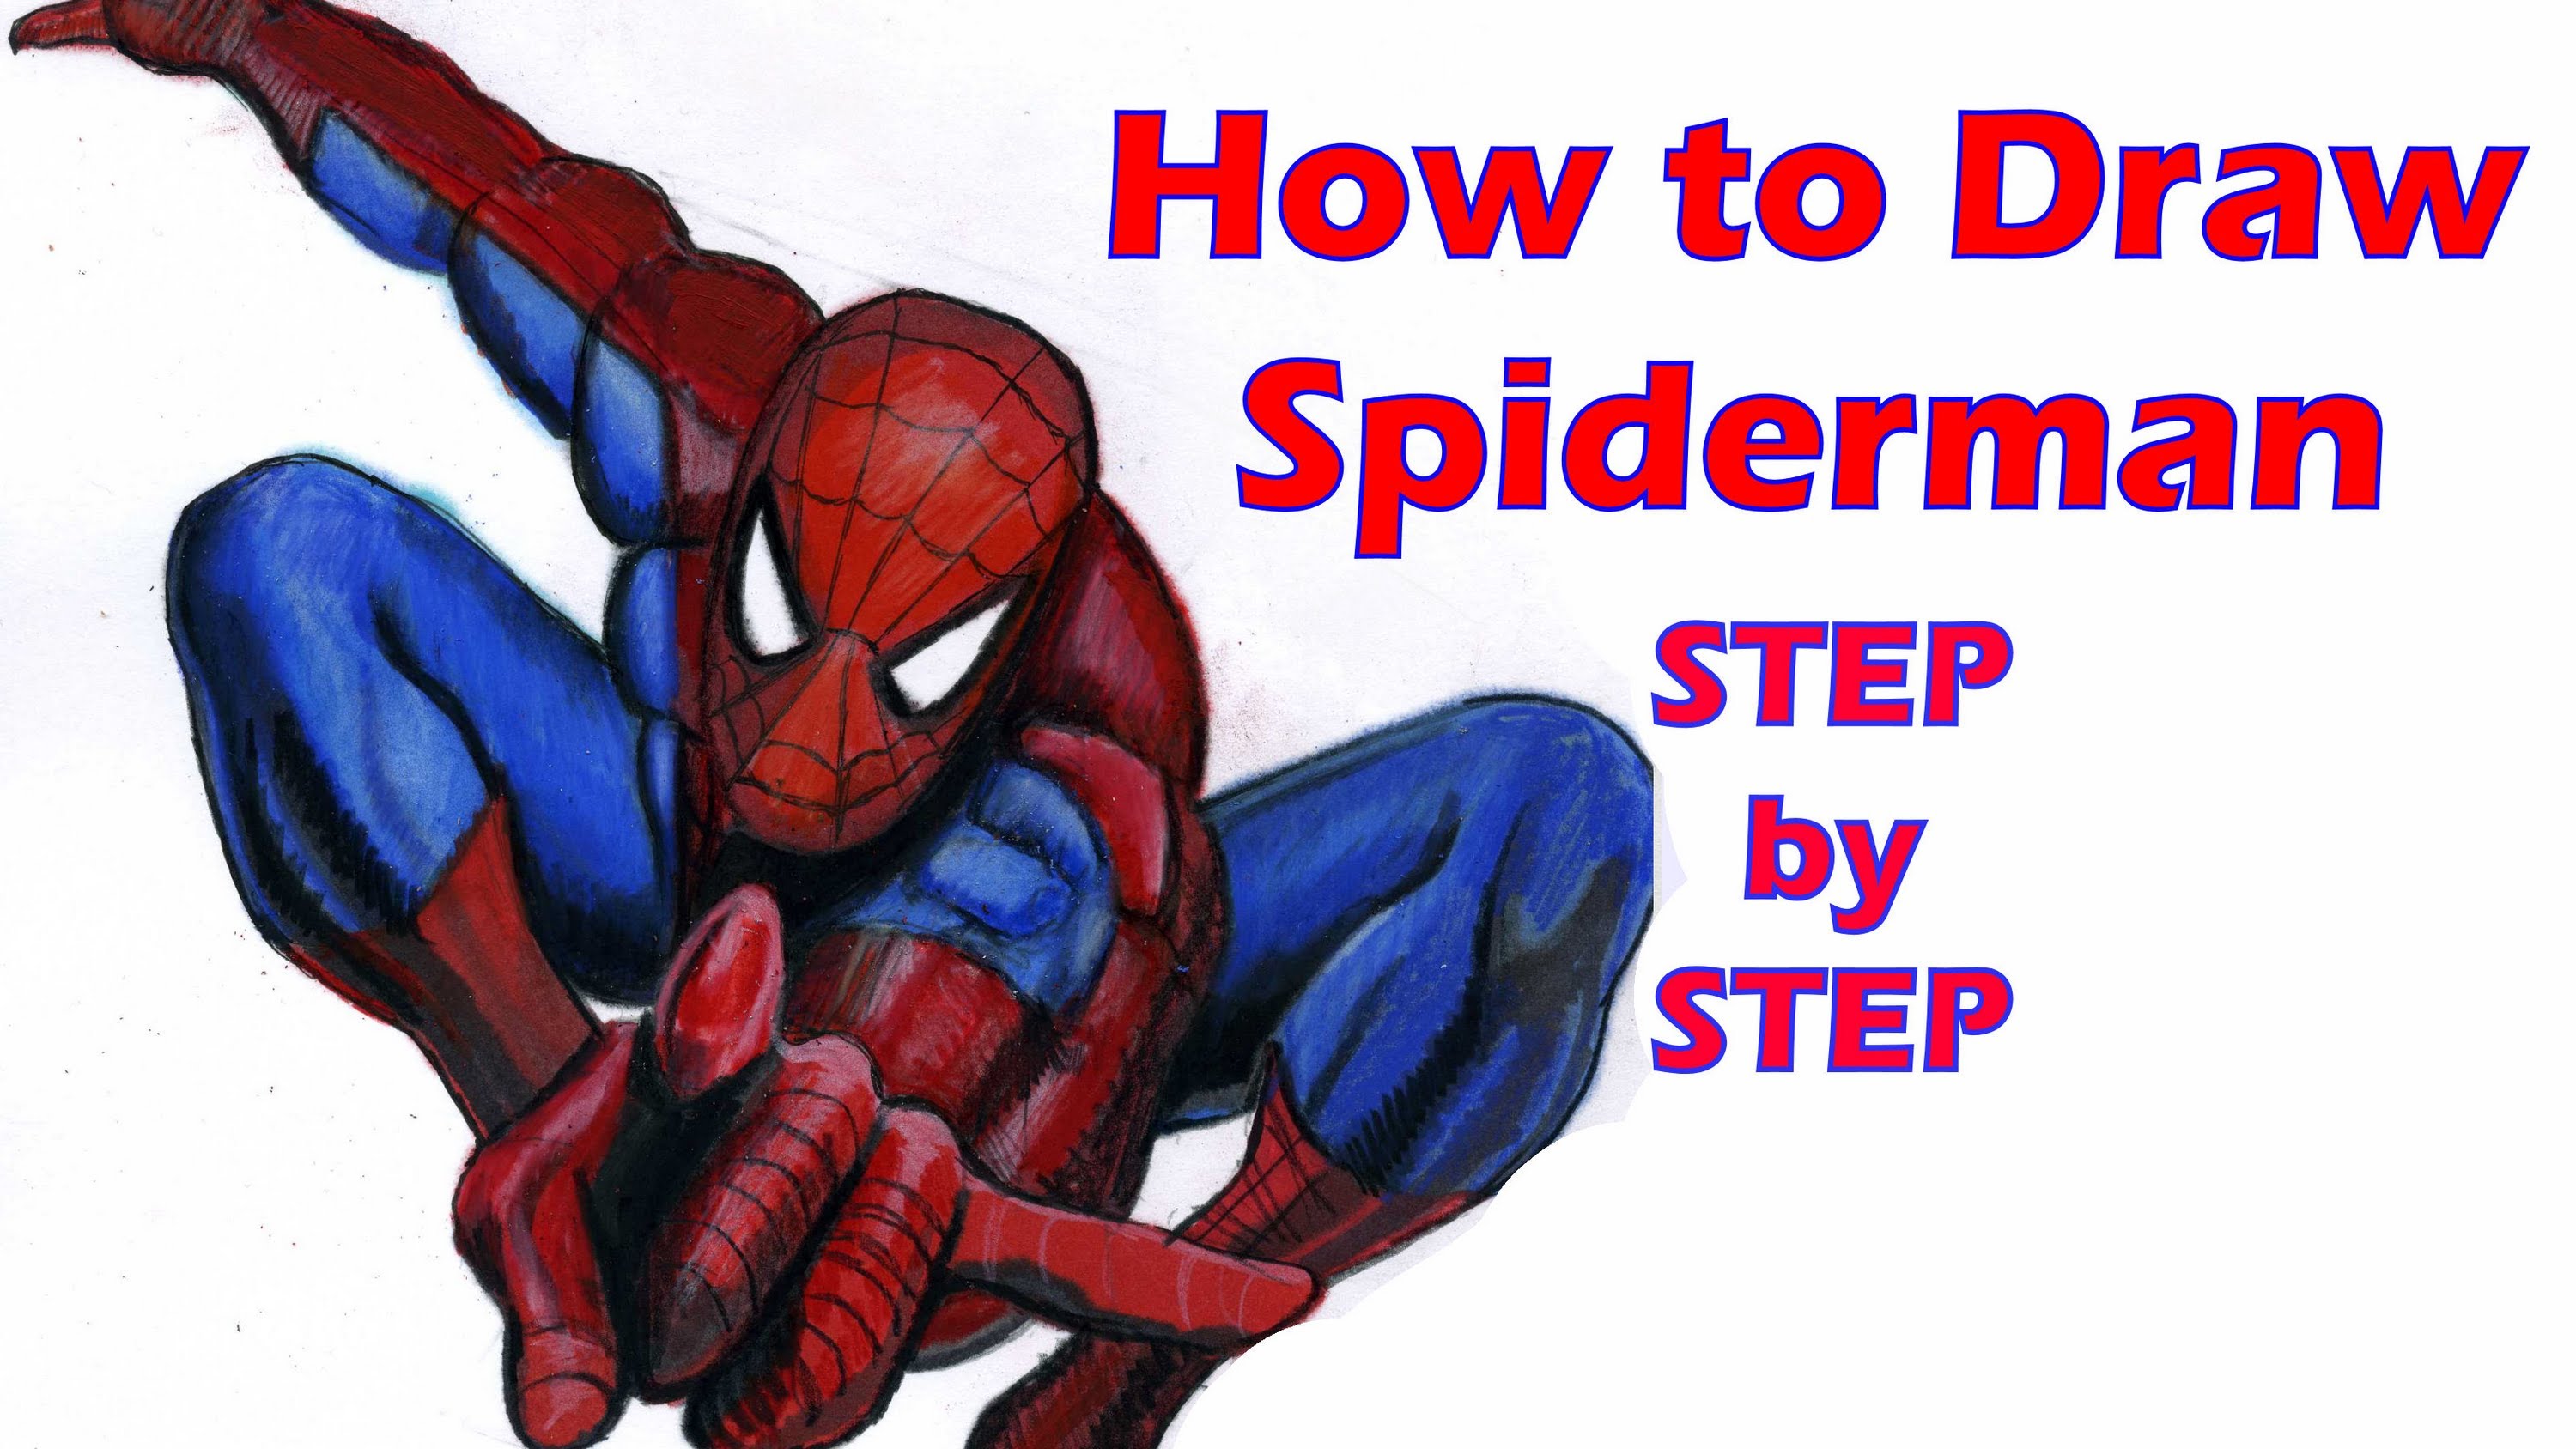 How to Draw Spiderman Step by Step - YouTube